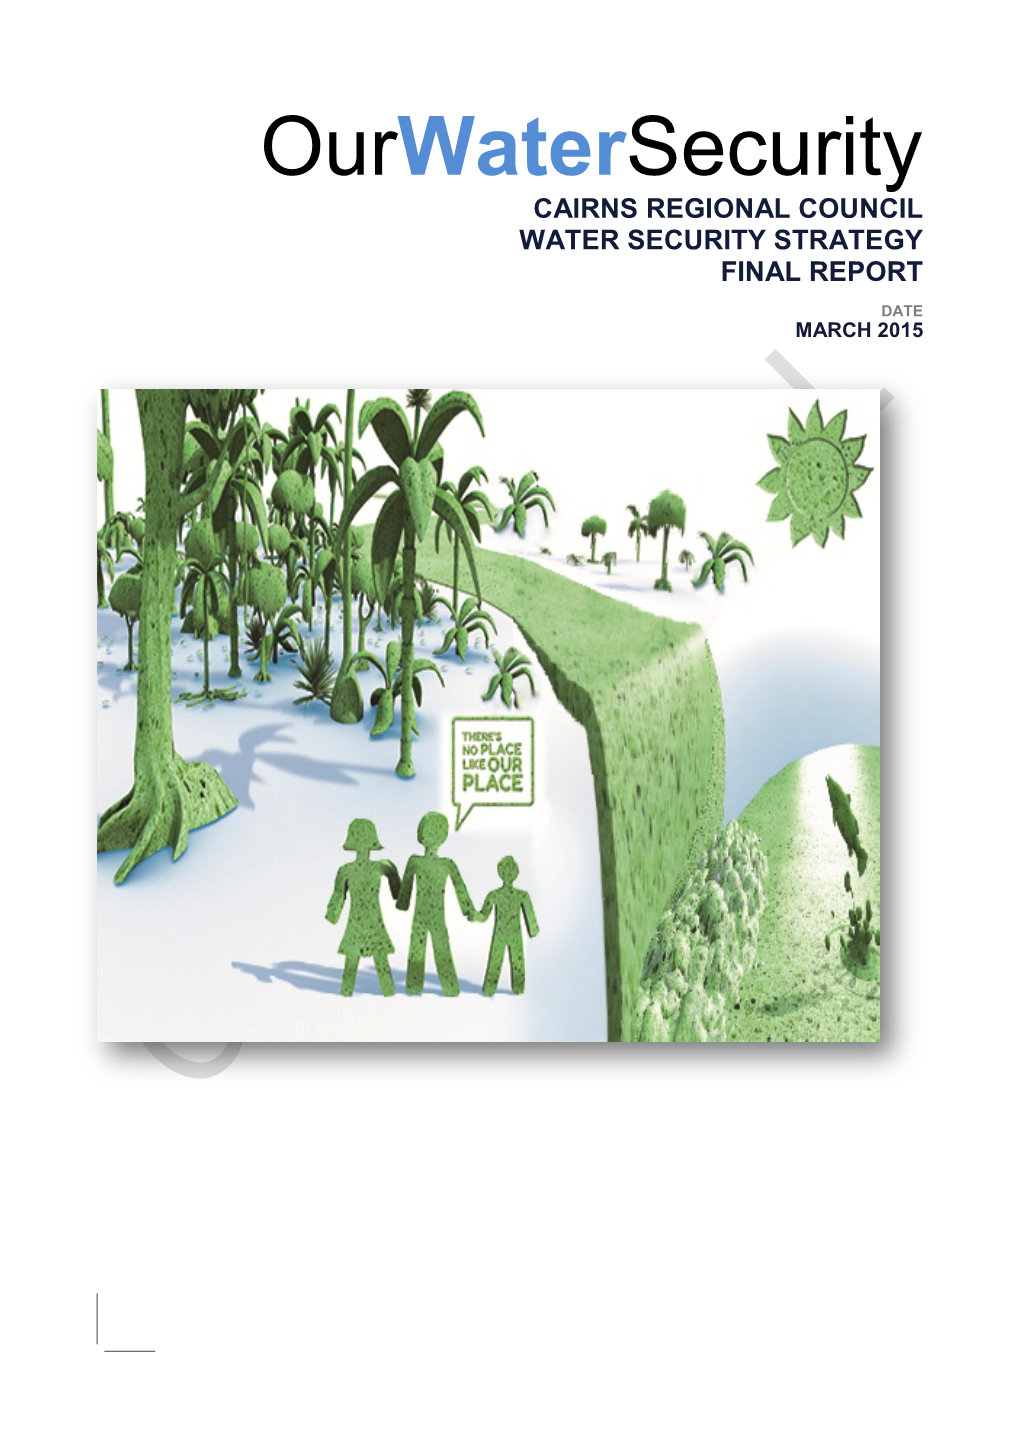 Ourwatersecurity CAIRNS REGIONAL COUNCIL WATER SECURITY STRATEGY FINAL REPORT